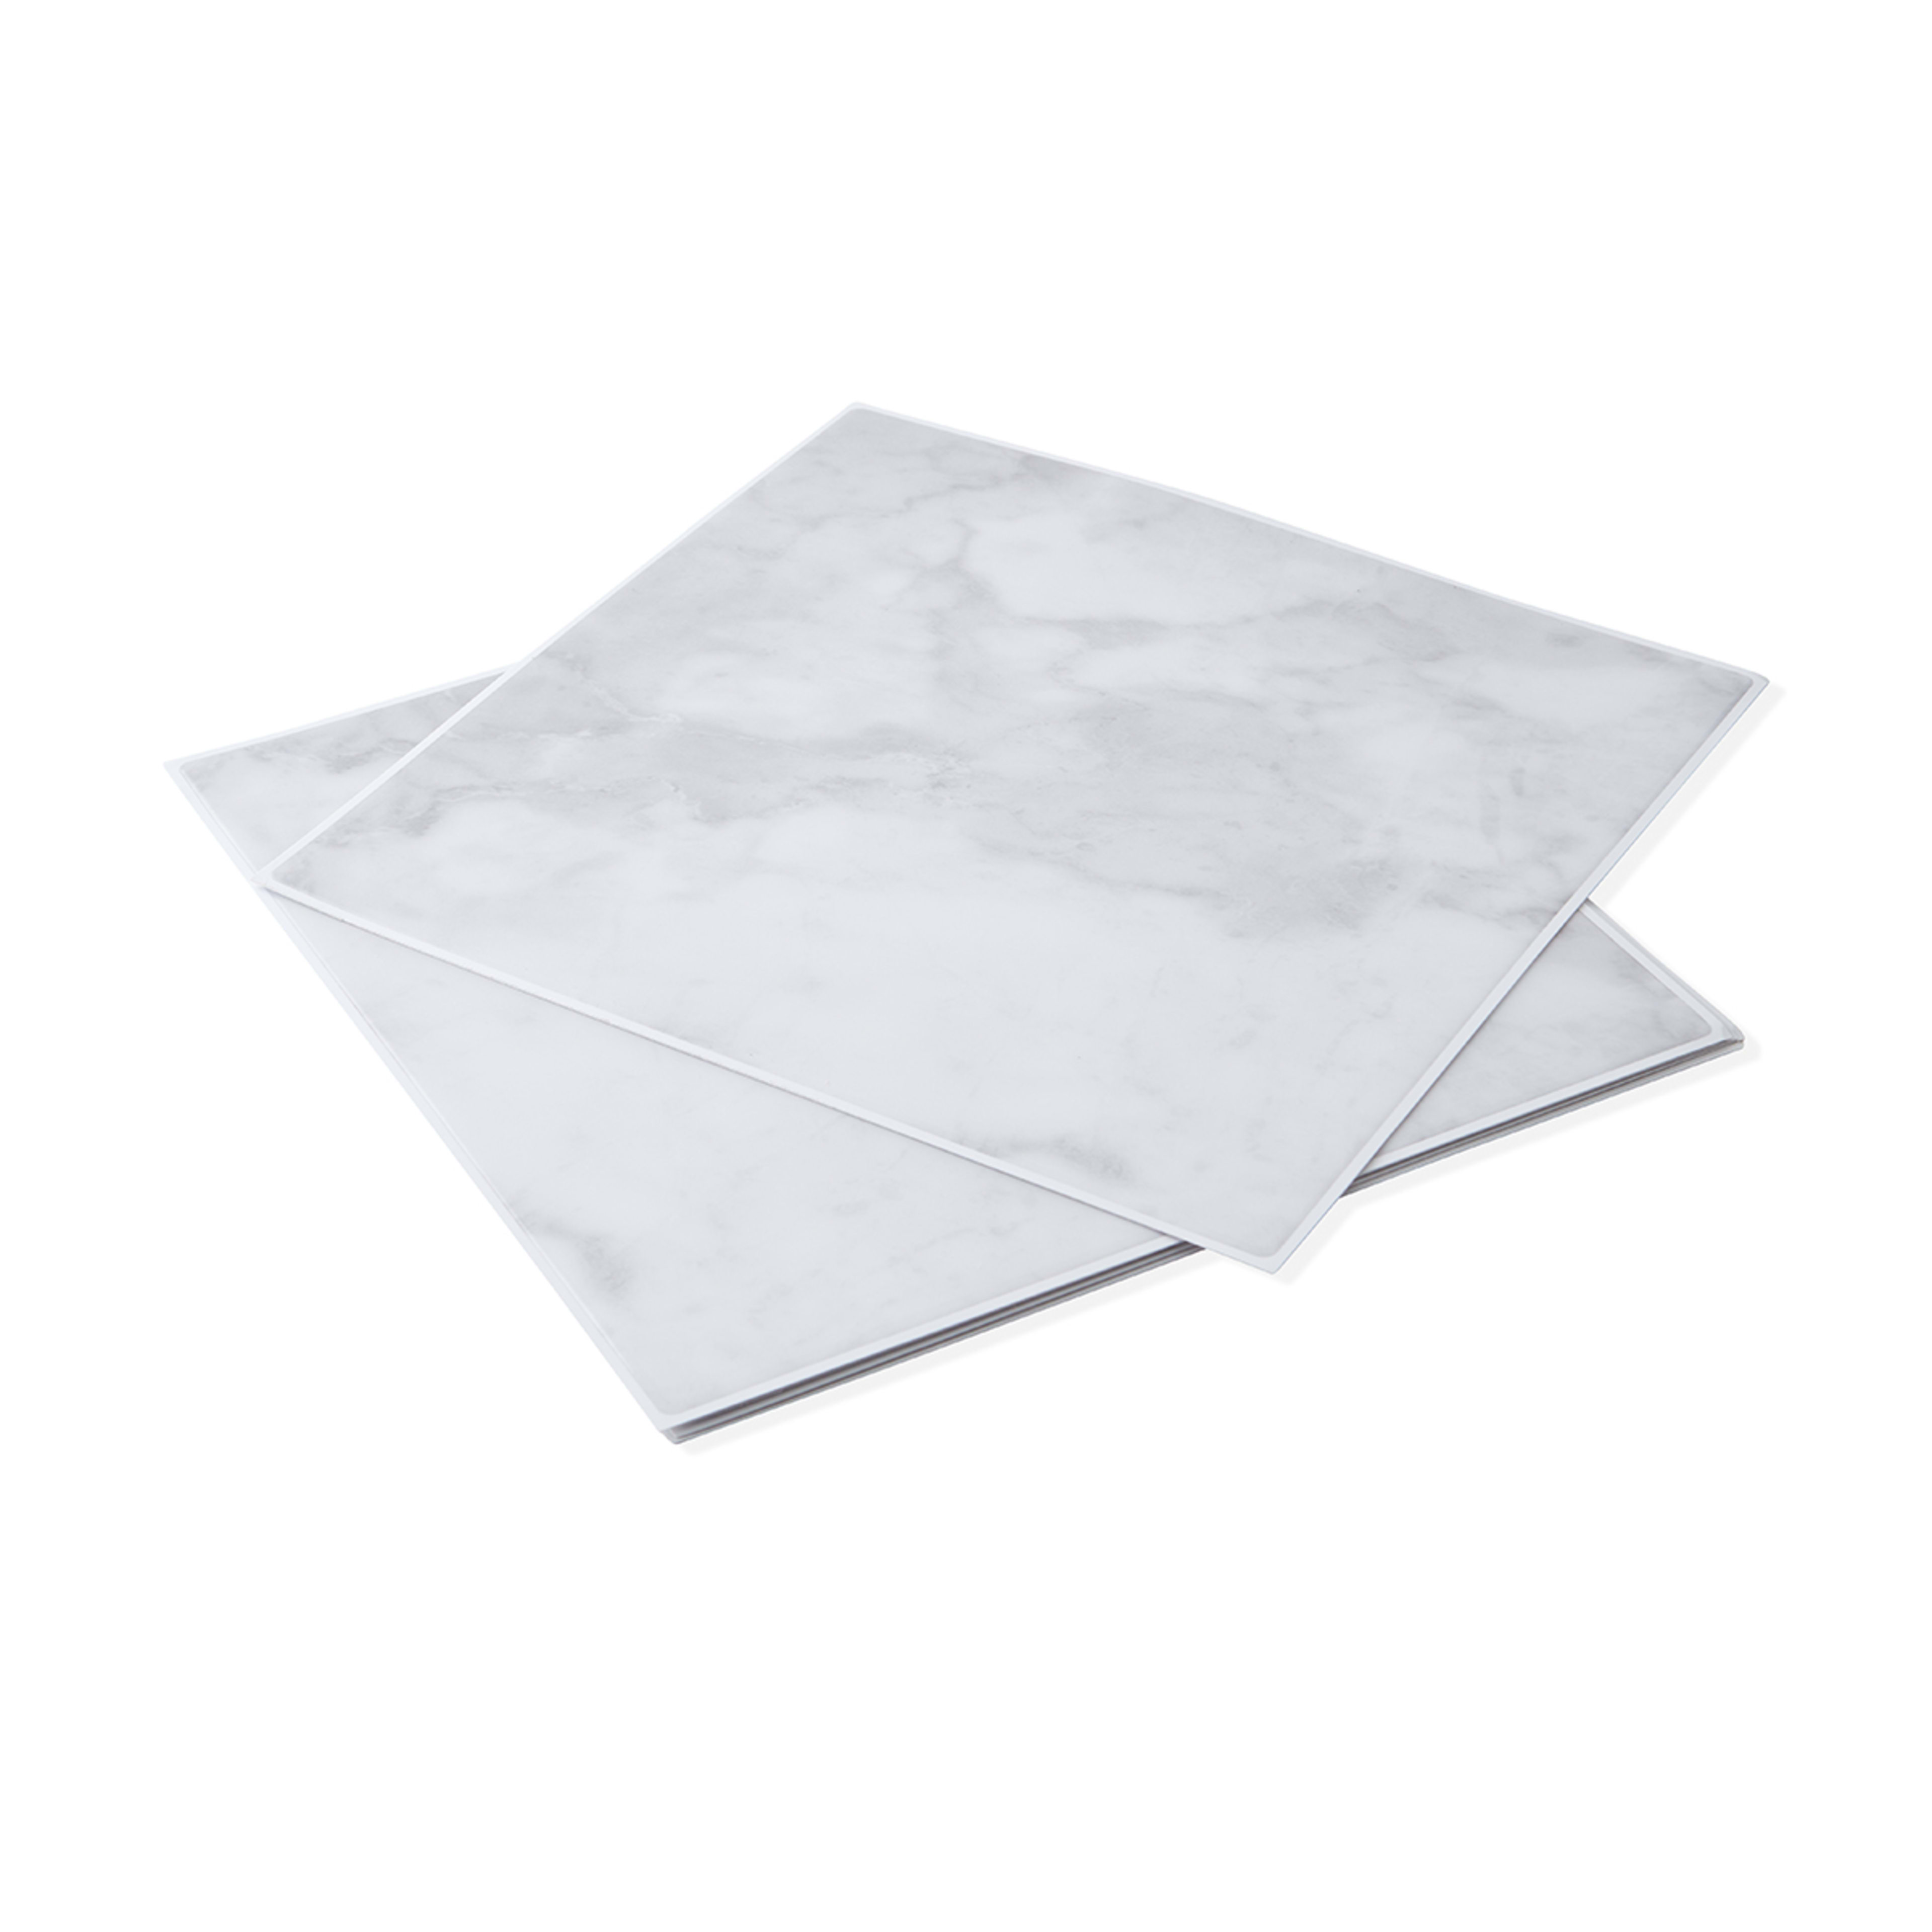 5 Pack Self Adhesive 3D Tiles - Oversize Marble - Kmart